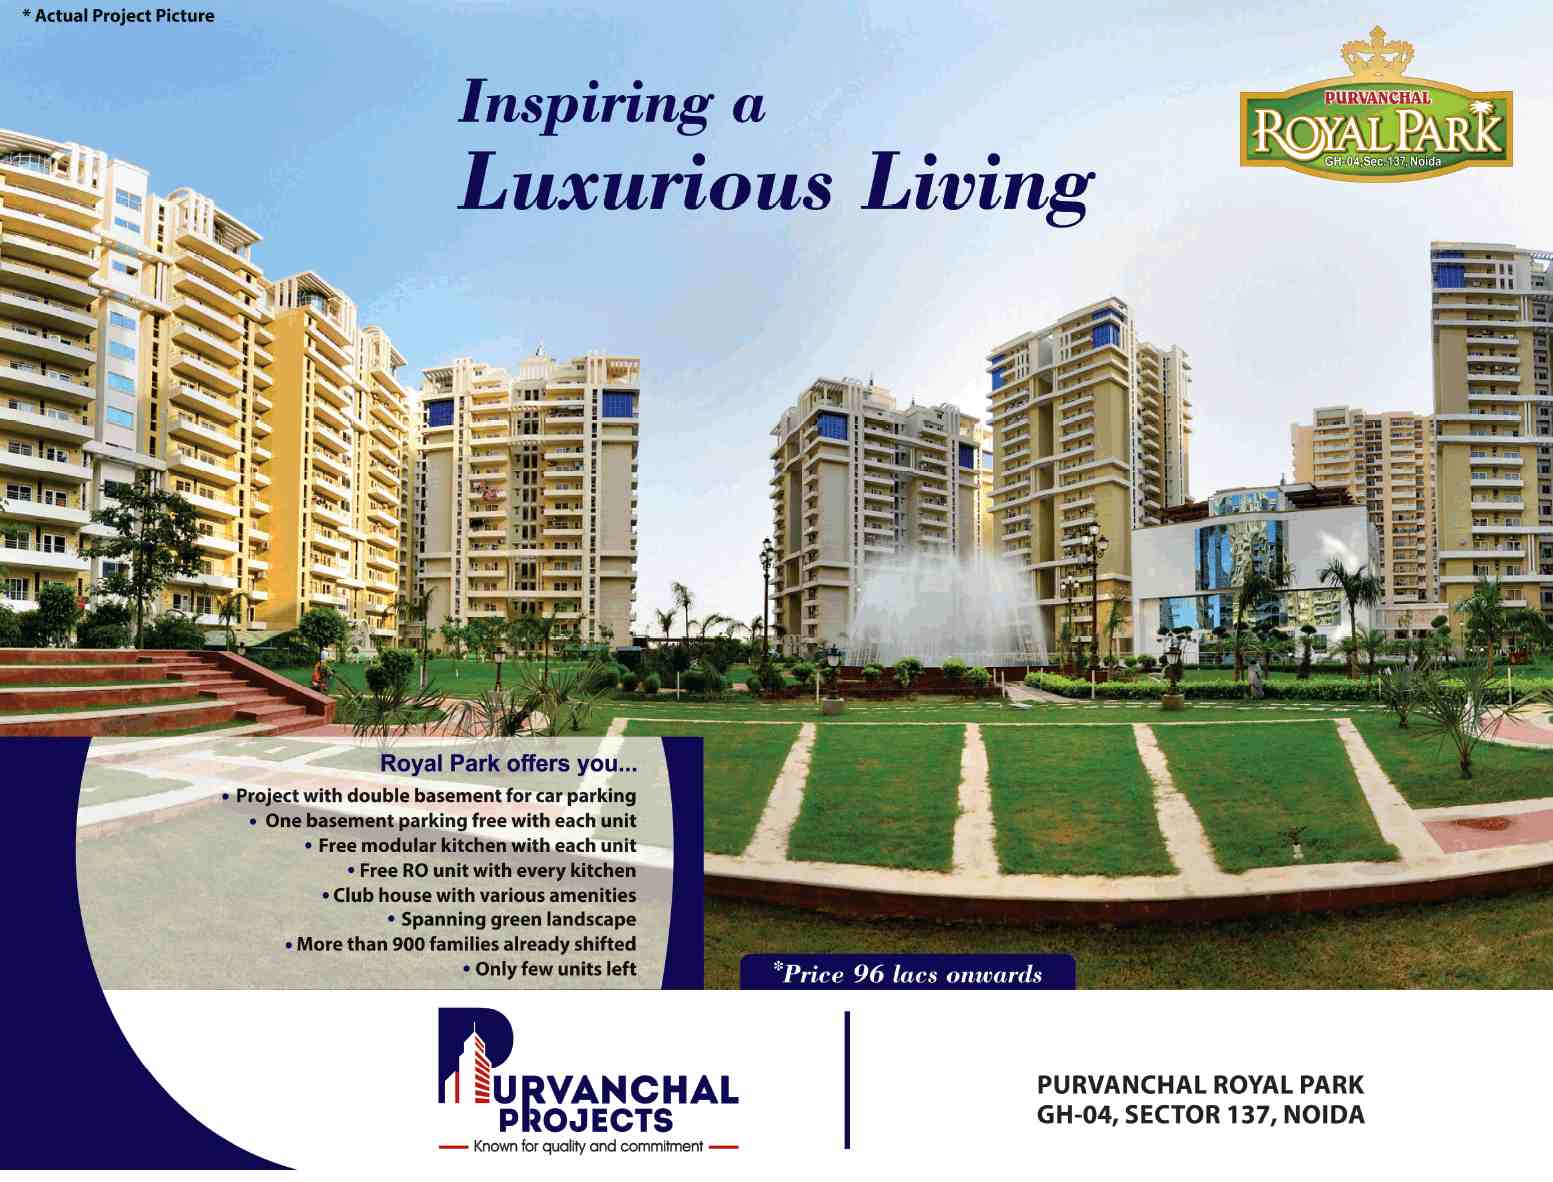 Purvanchal Royal Park is inspiring a luxurious living in Noida Update